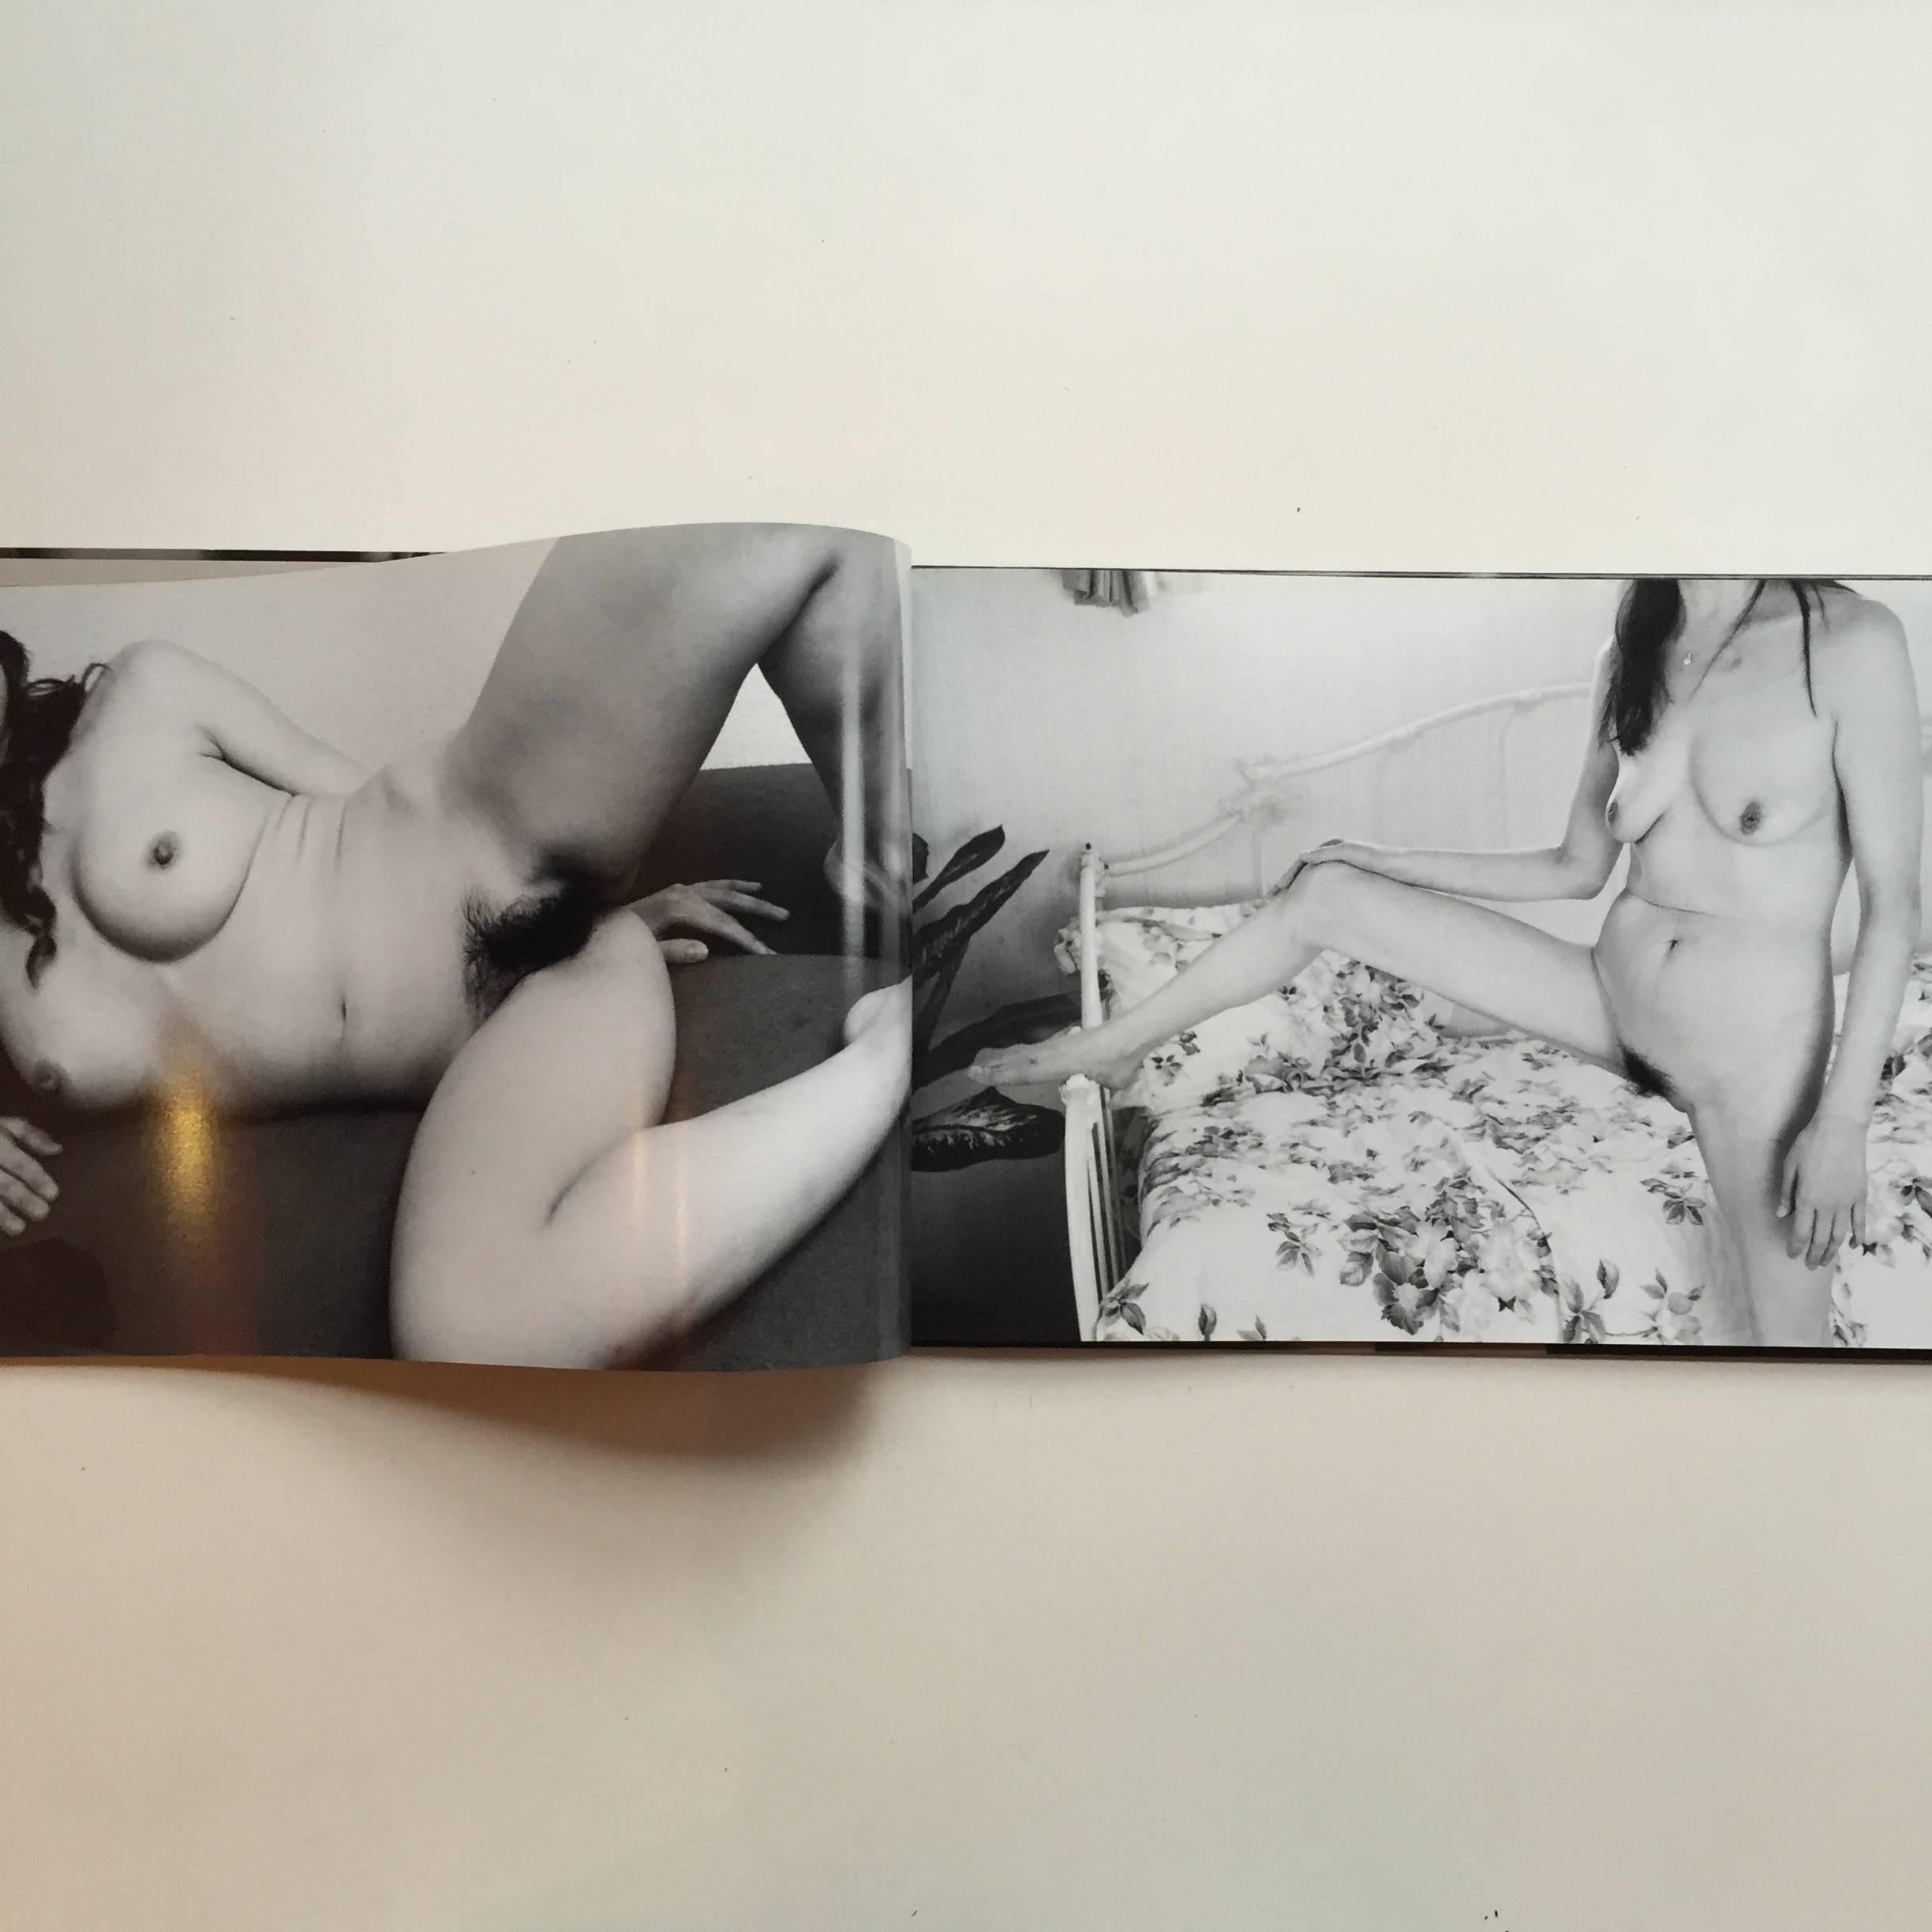 First edition, published by Aat Room/Eyesencia, 2004

Araki Nobuyoshi’s work continually explores the female form in his own unique style. In Uragiri, Araki focuses on the imperfections and shapes across the body, with this uplifting light-hearted